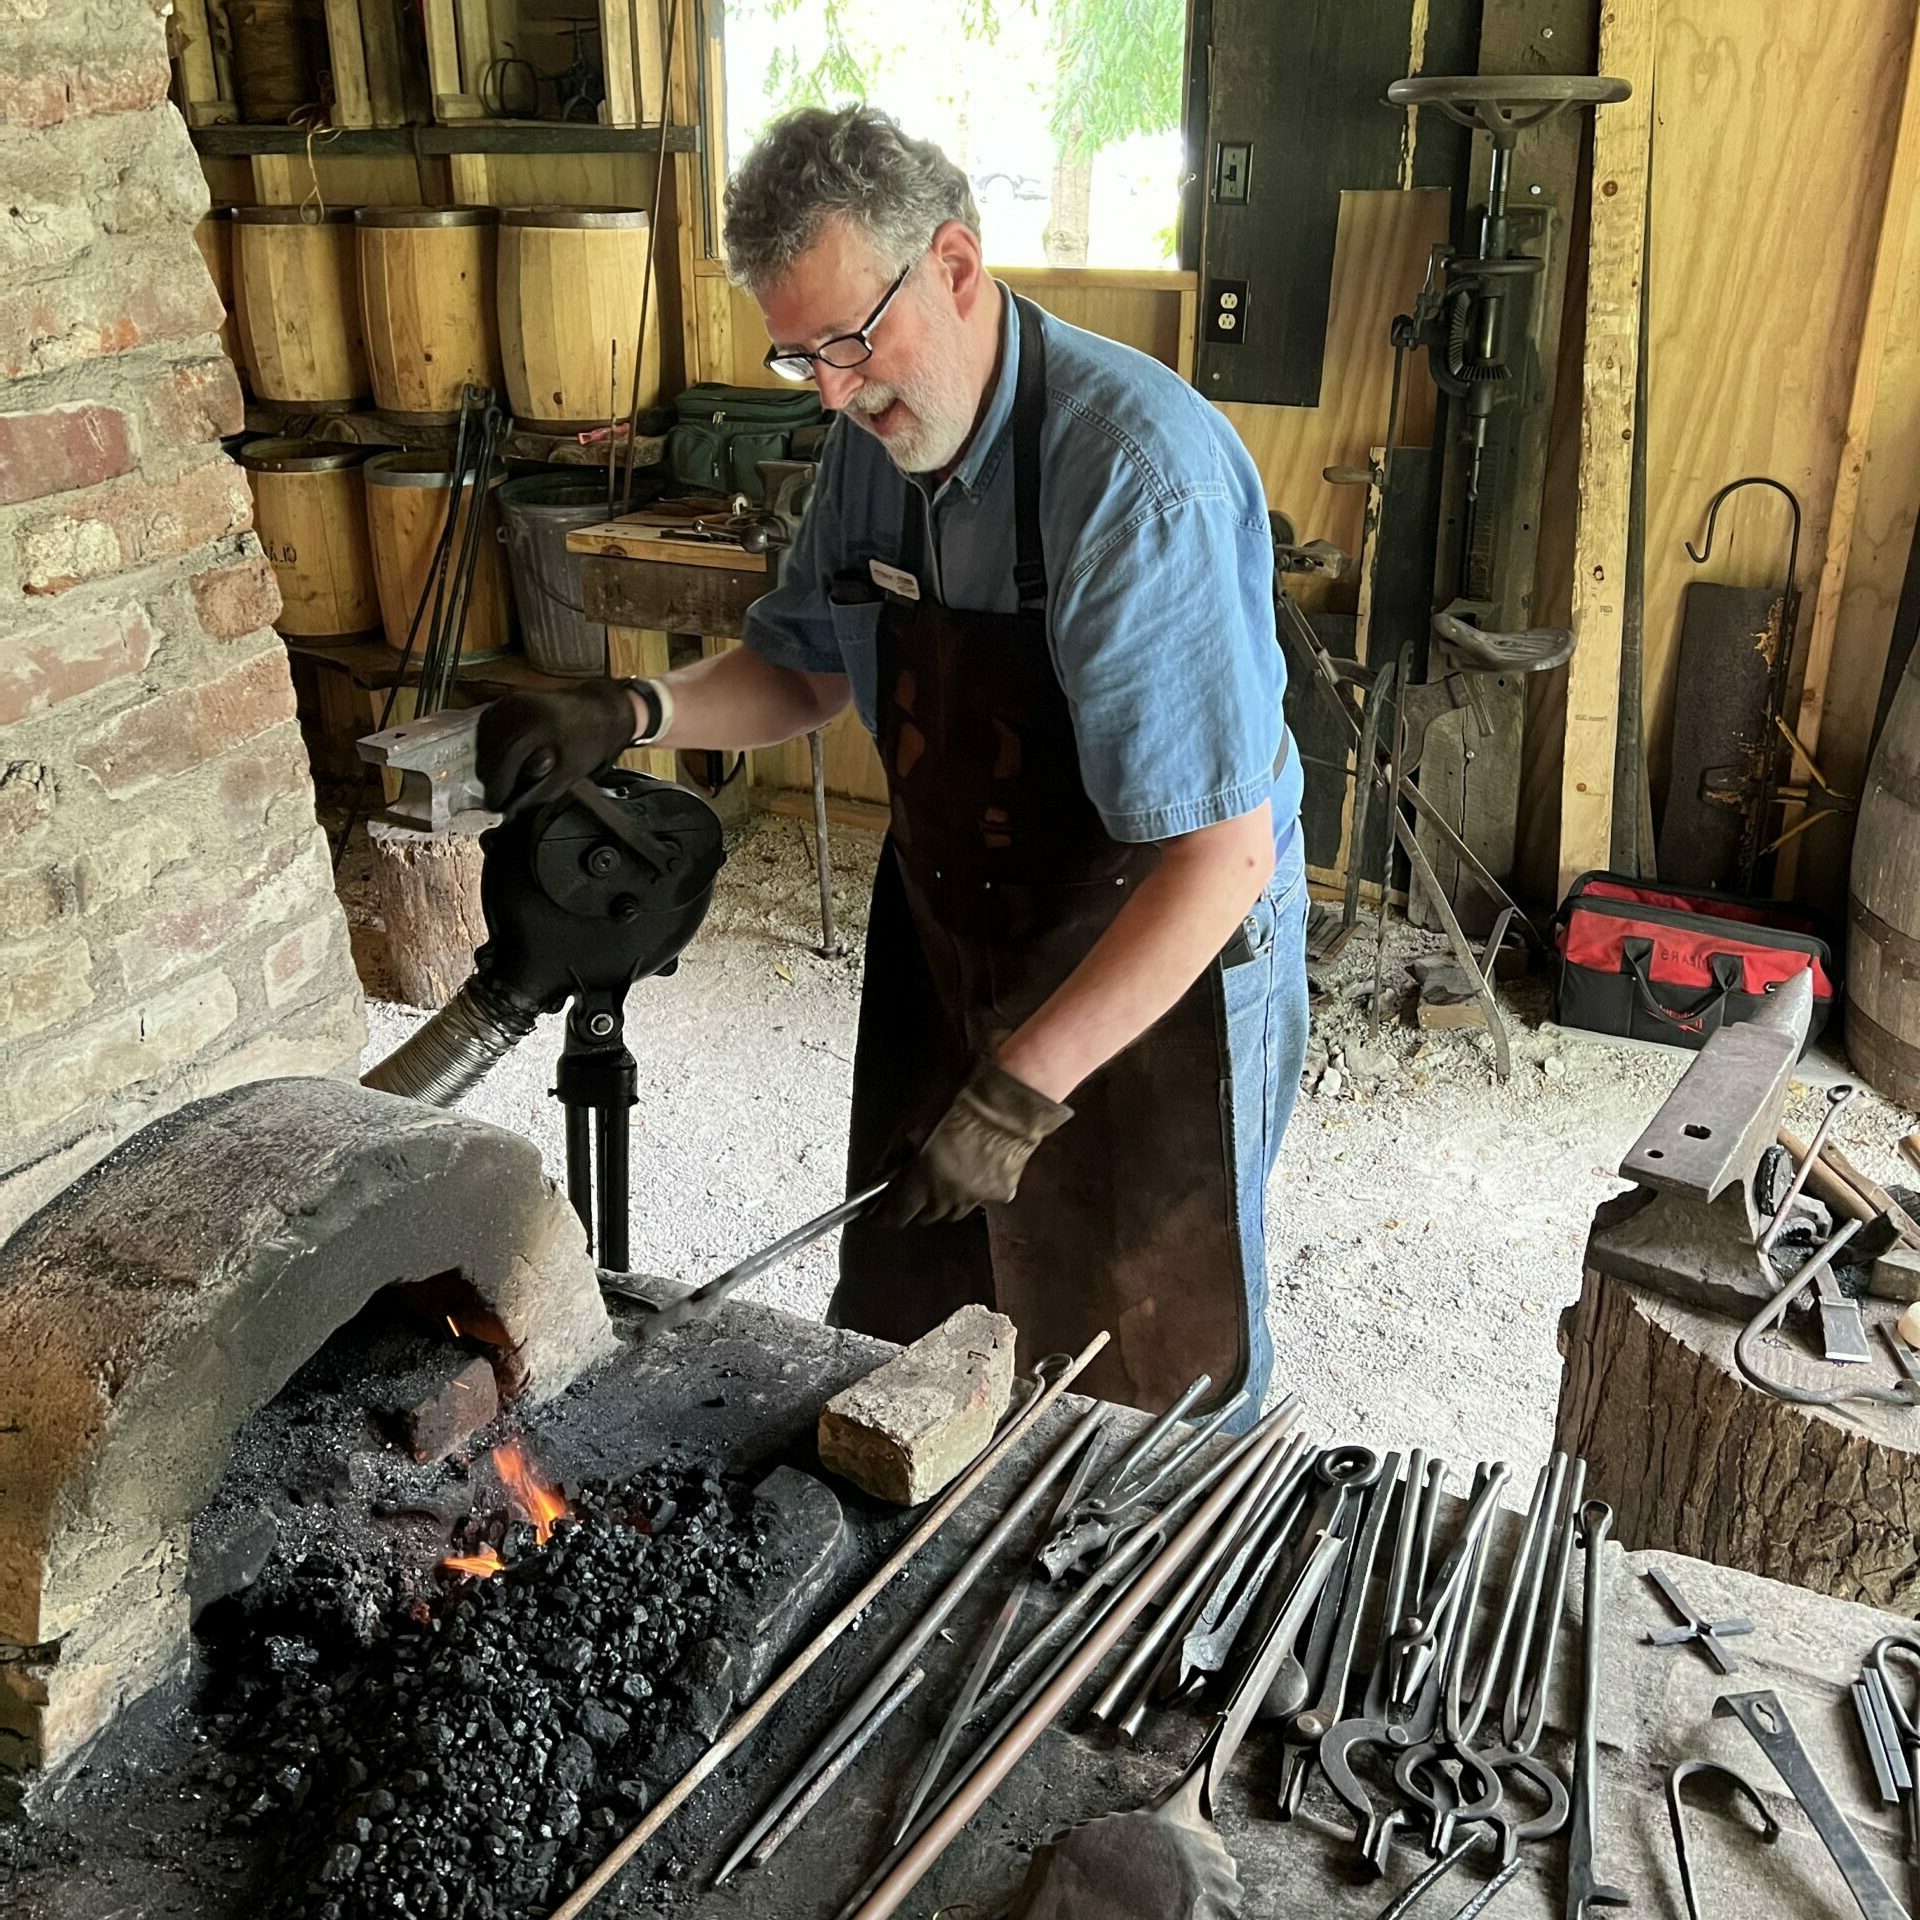 A blacksmith works at the forge